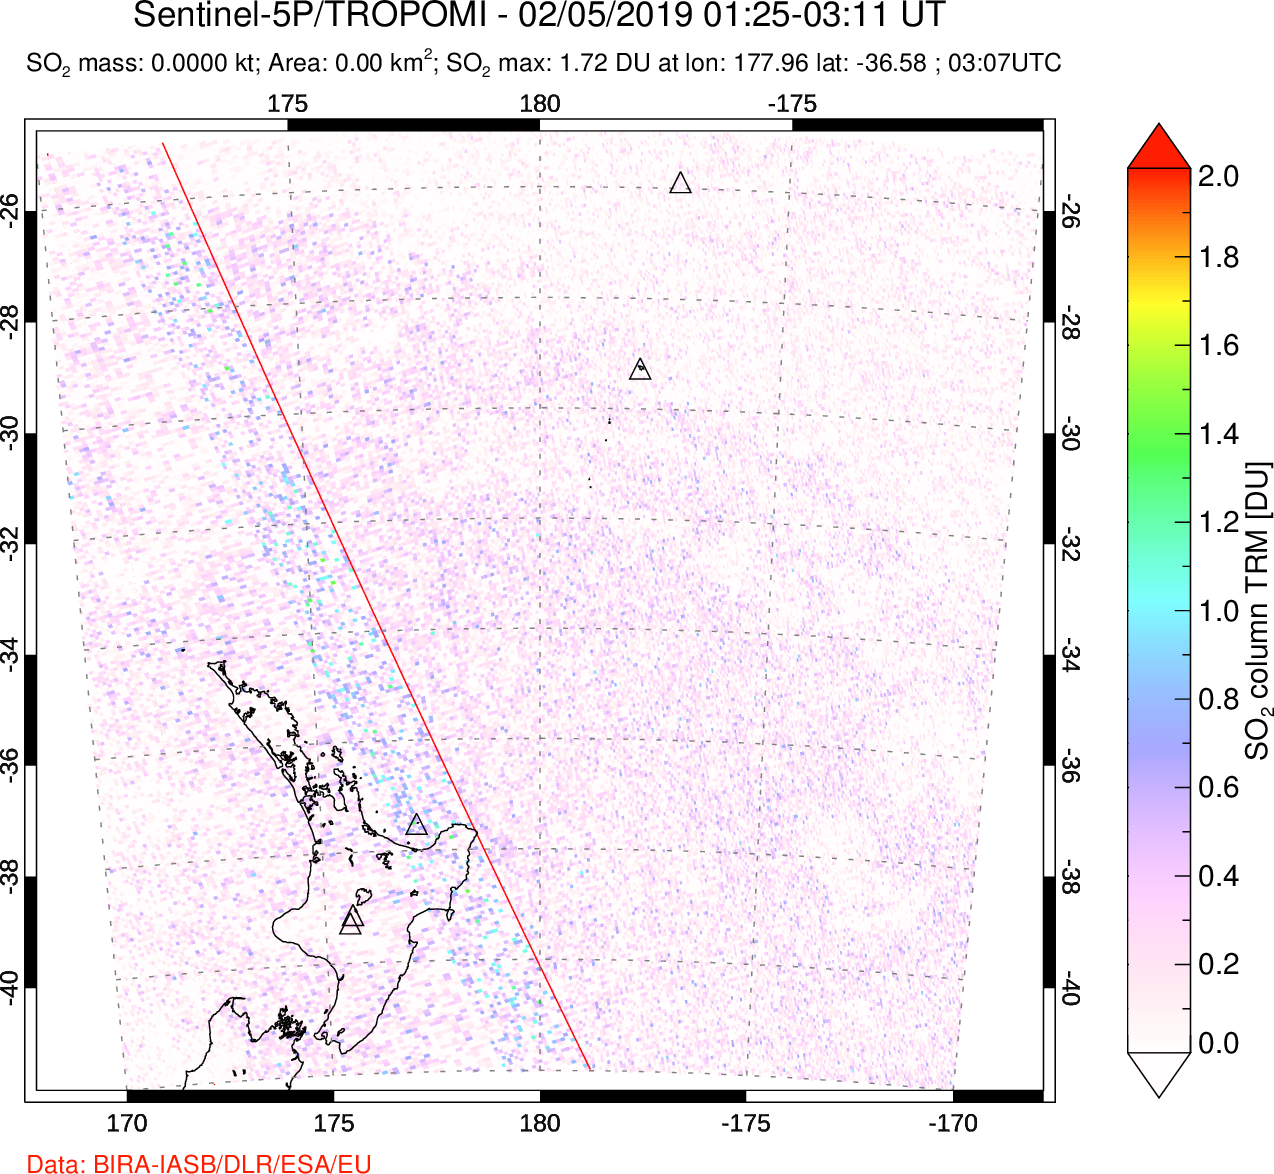 A sulfur dioxide image over New Zealand on Feb 05, 2019.